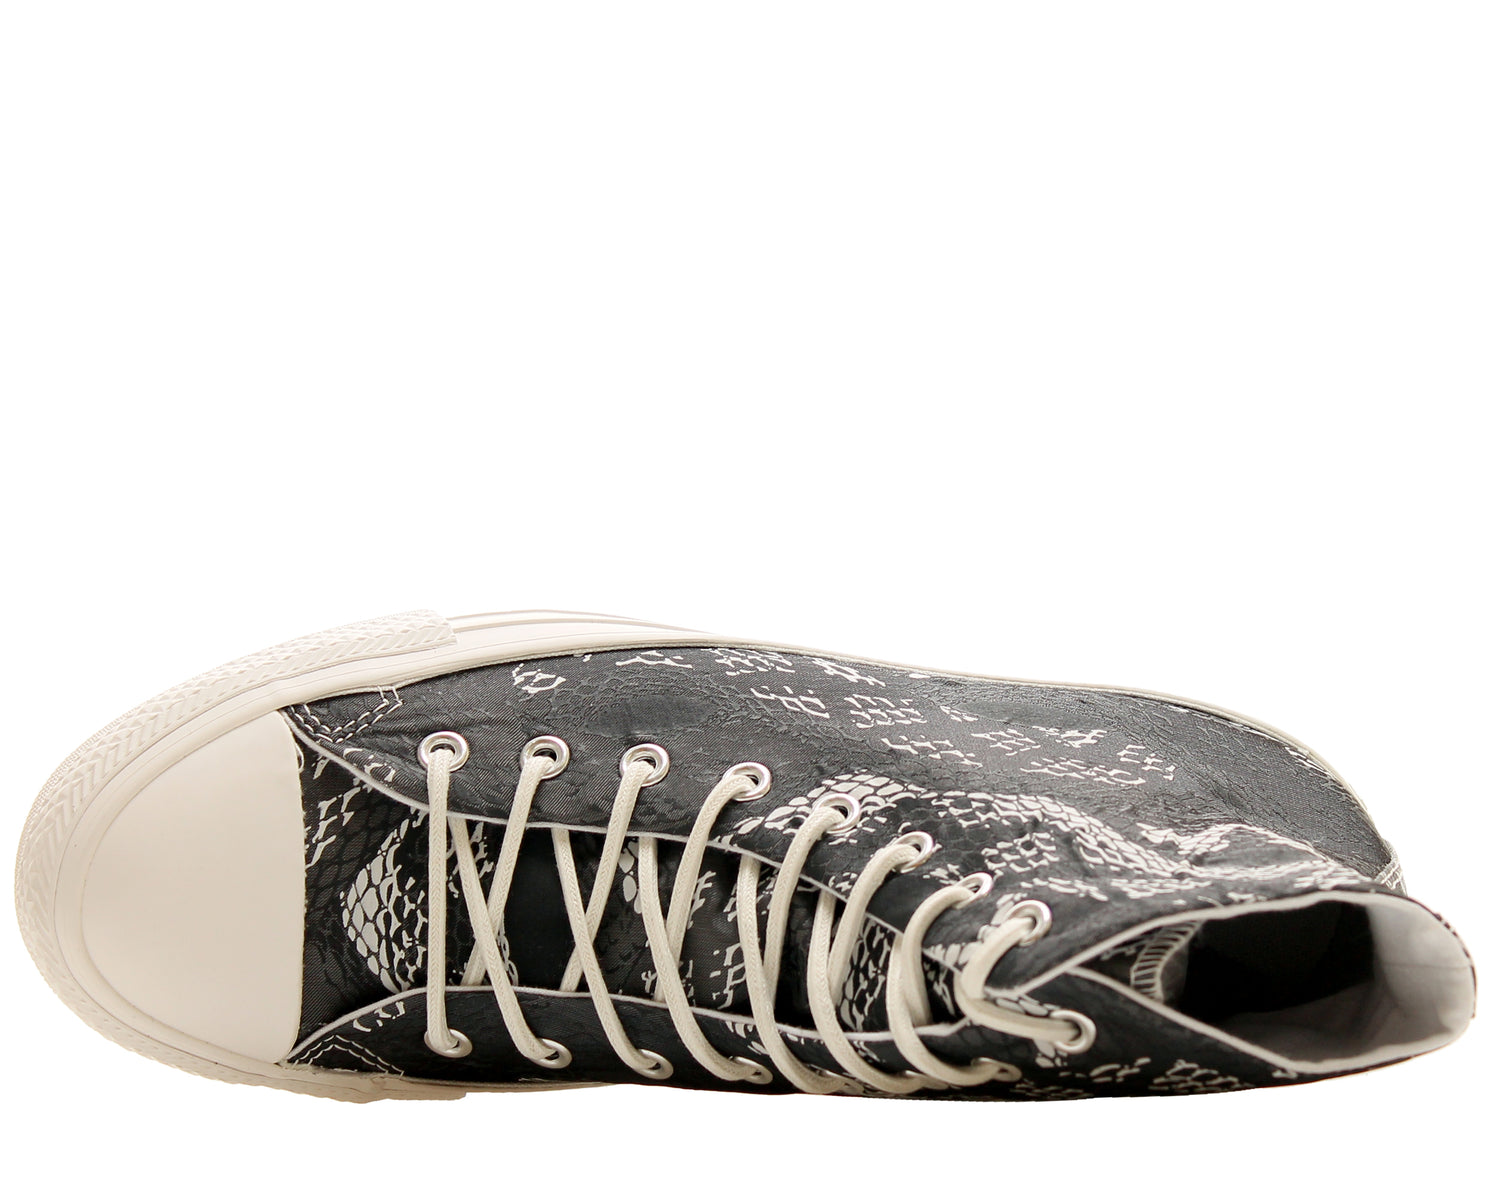 Converse Chuck Taylor All Star Reptile Print High top Women's Sneakers